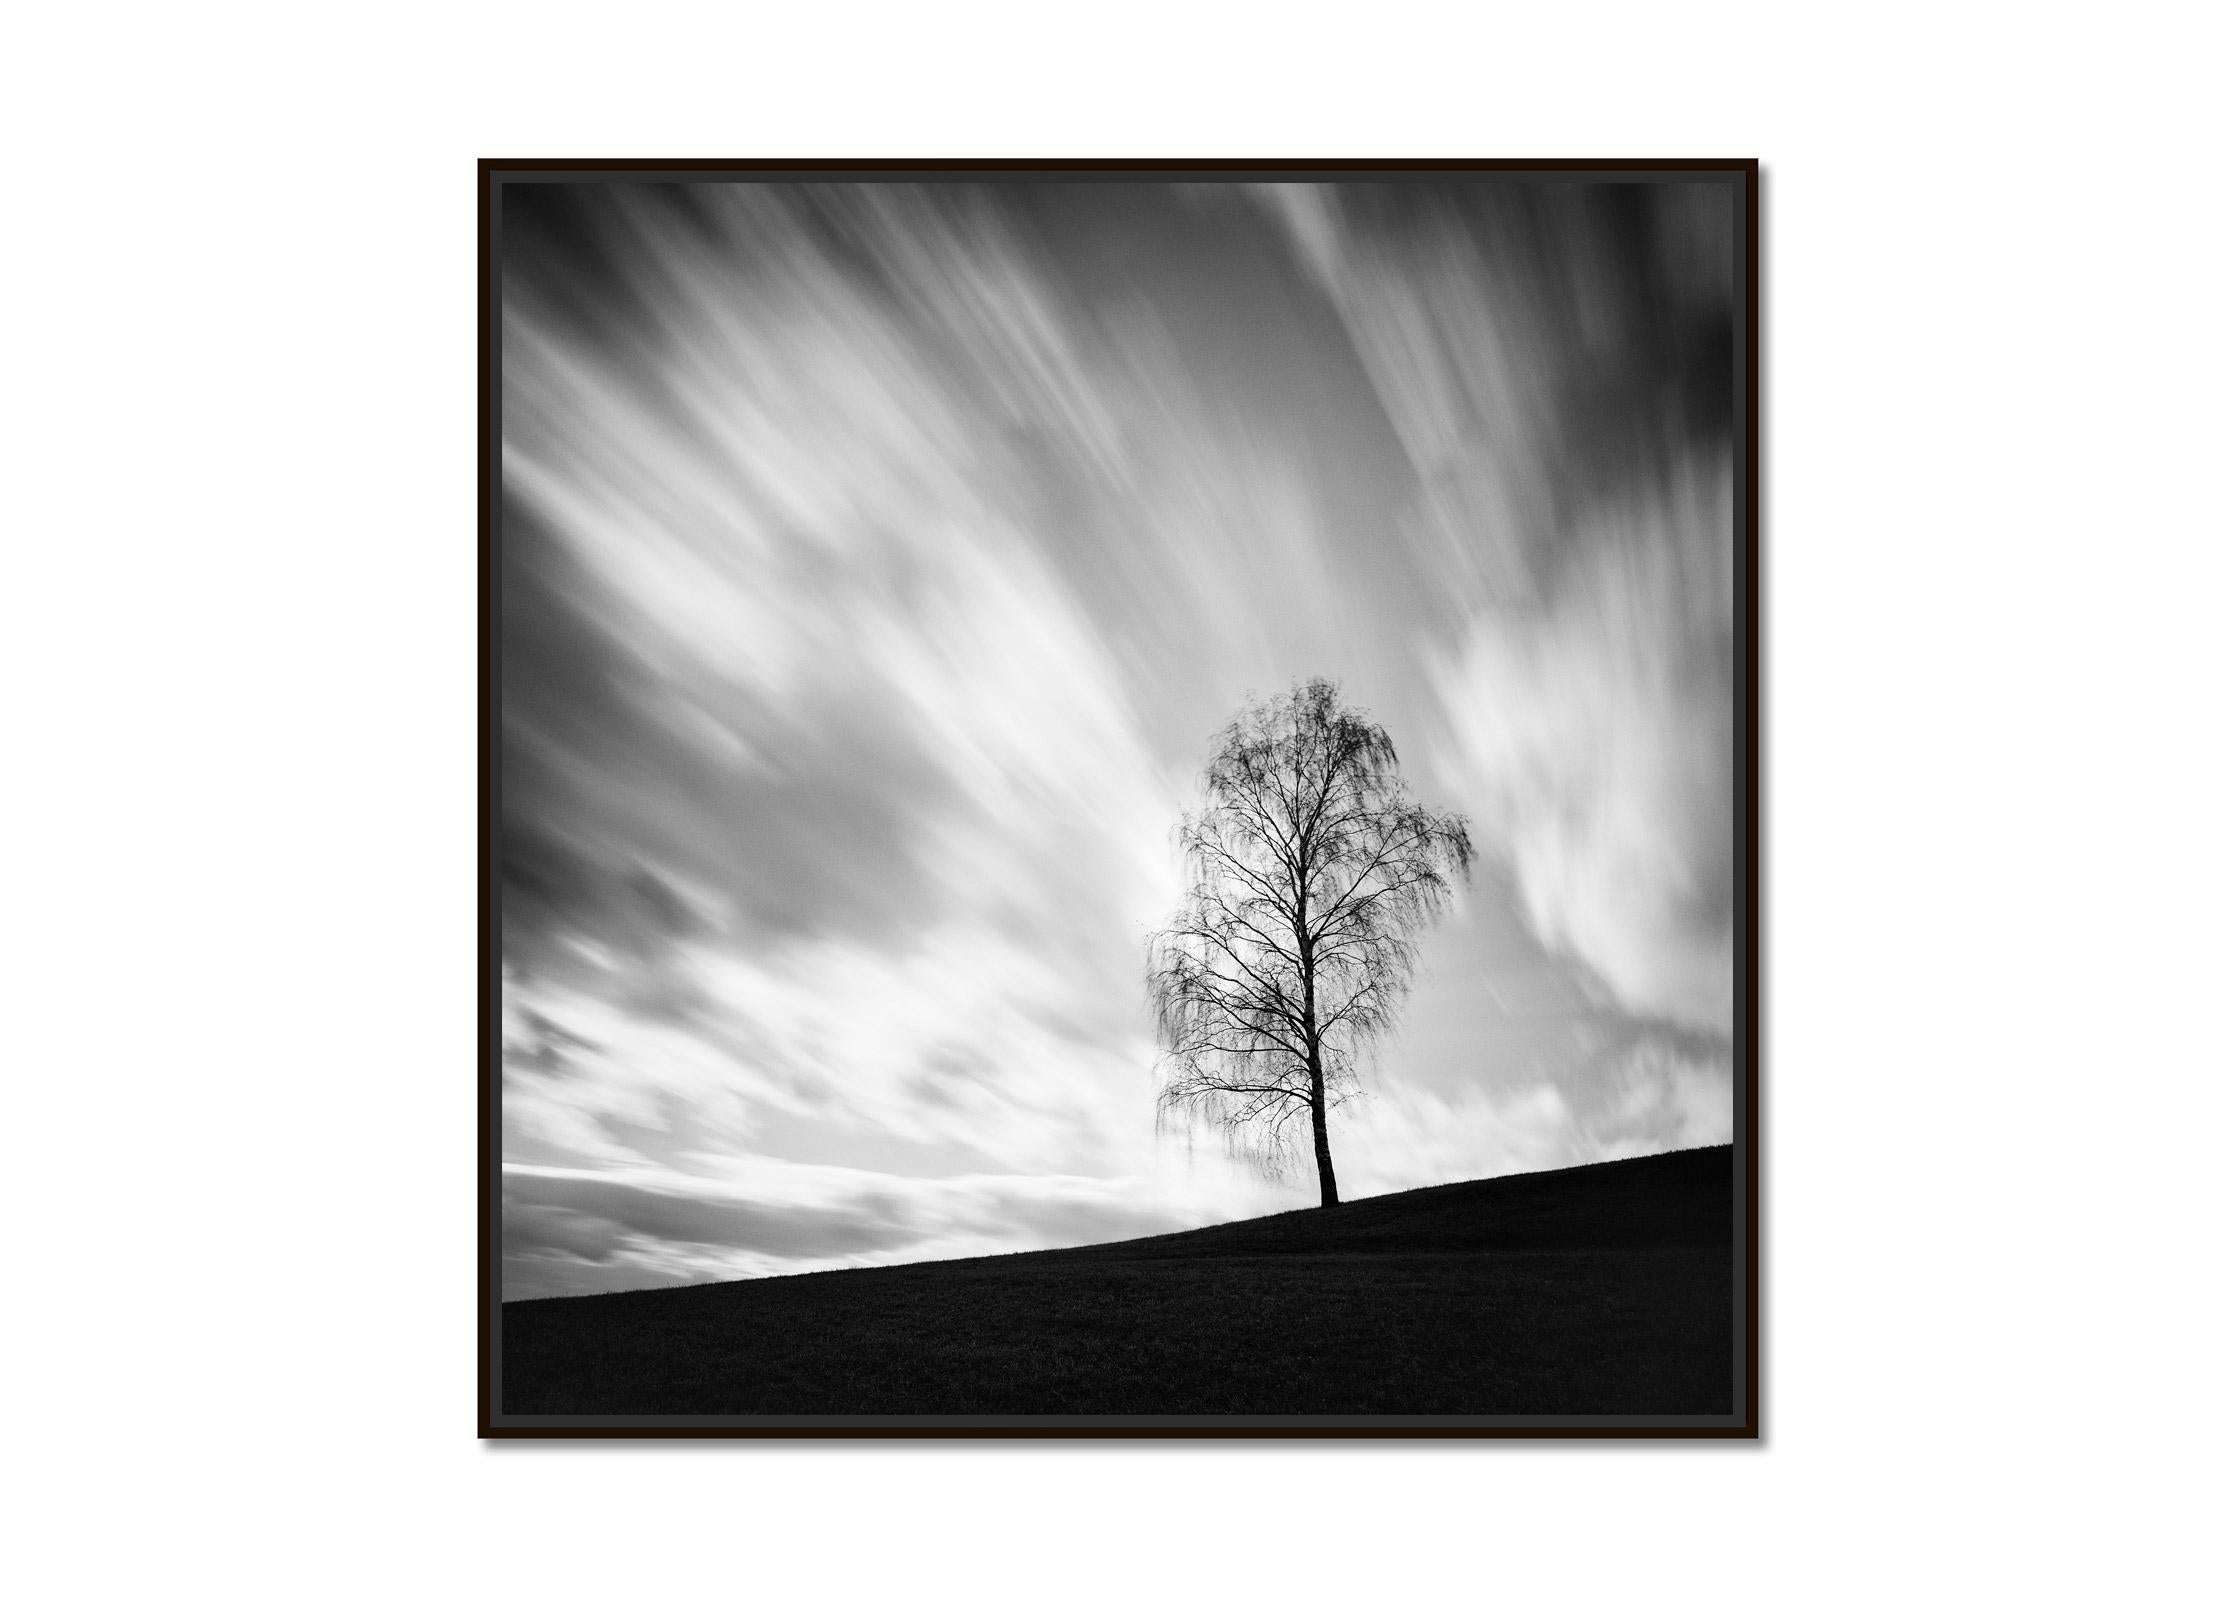 Black Birch, Austria, contemporary art black and white photography, landscape - Photograph by Gerald Berghammer